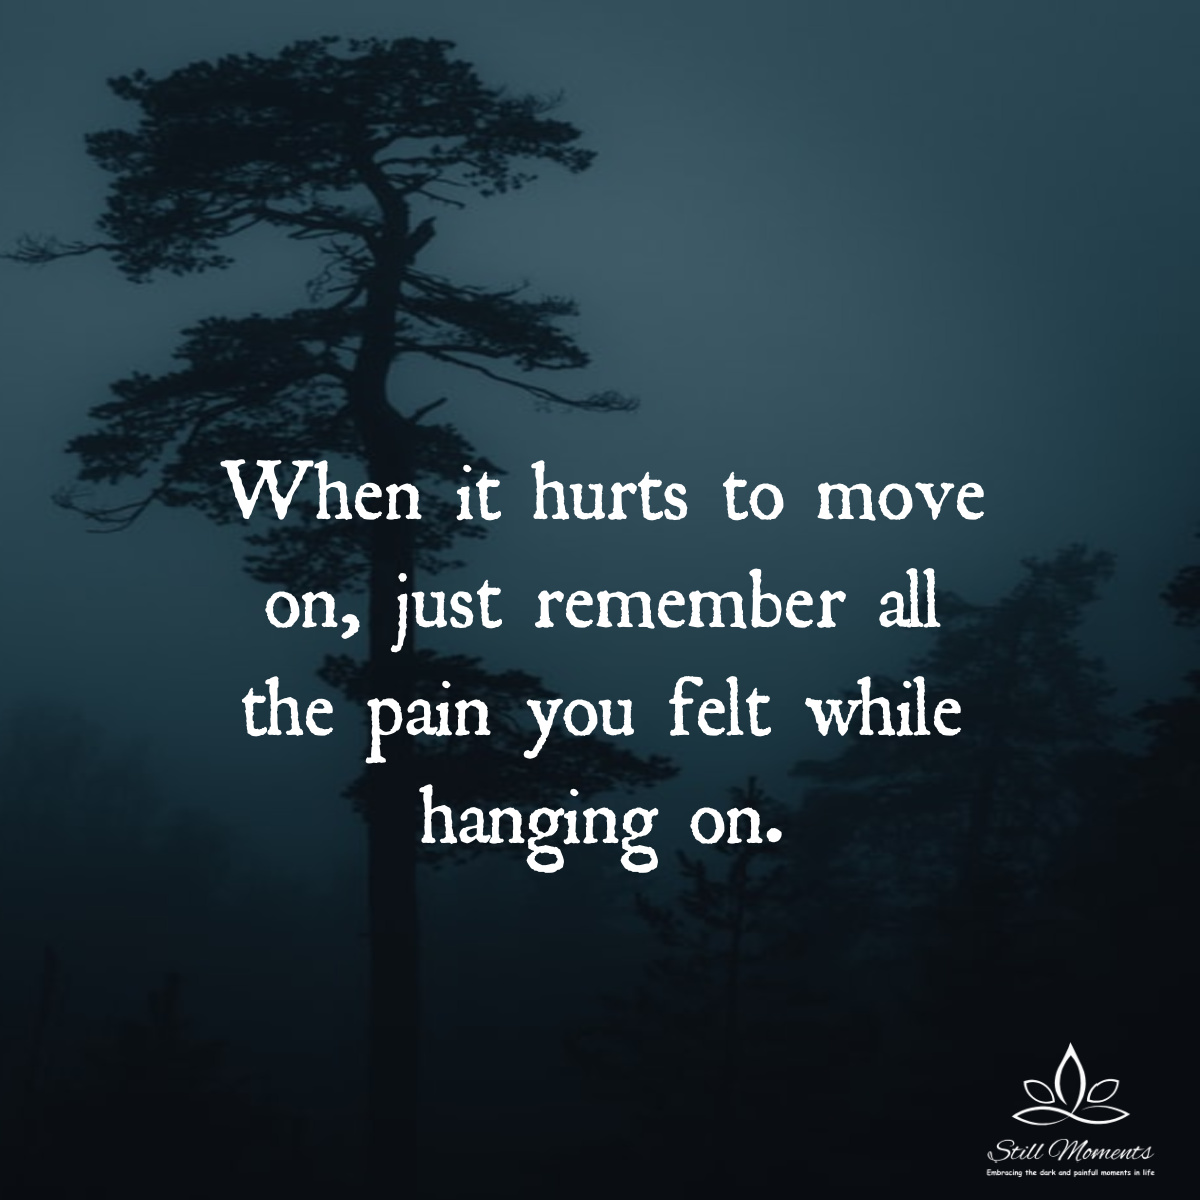 When It Hurts to Move On - Still Moments